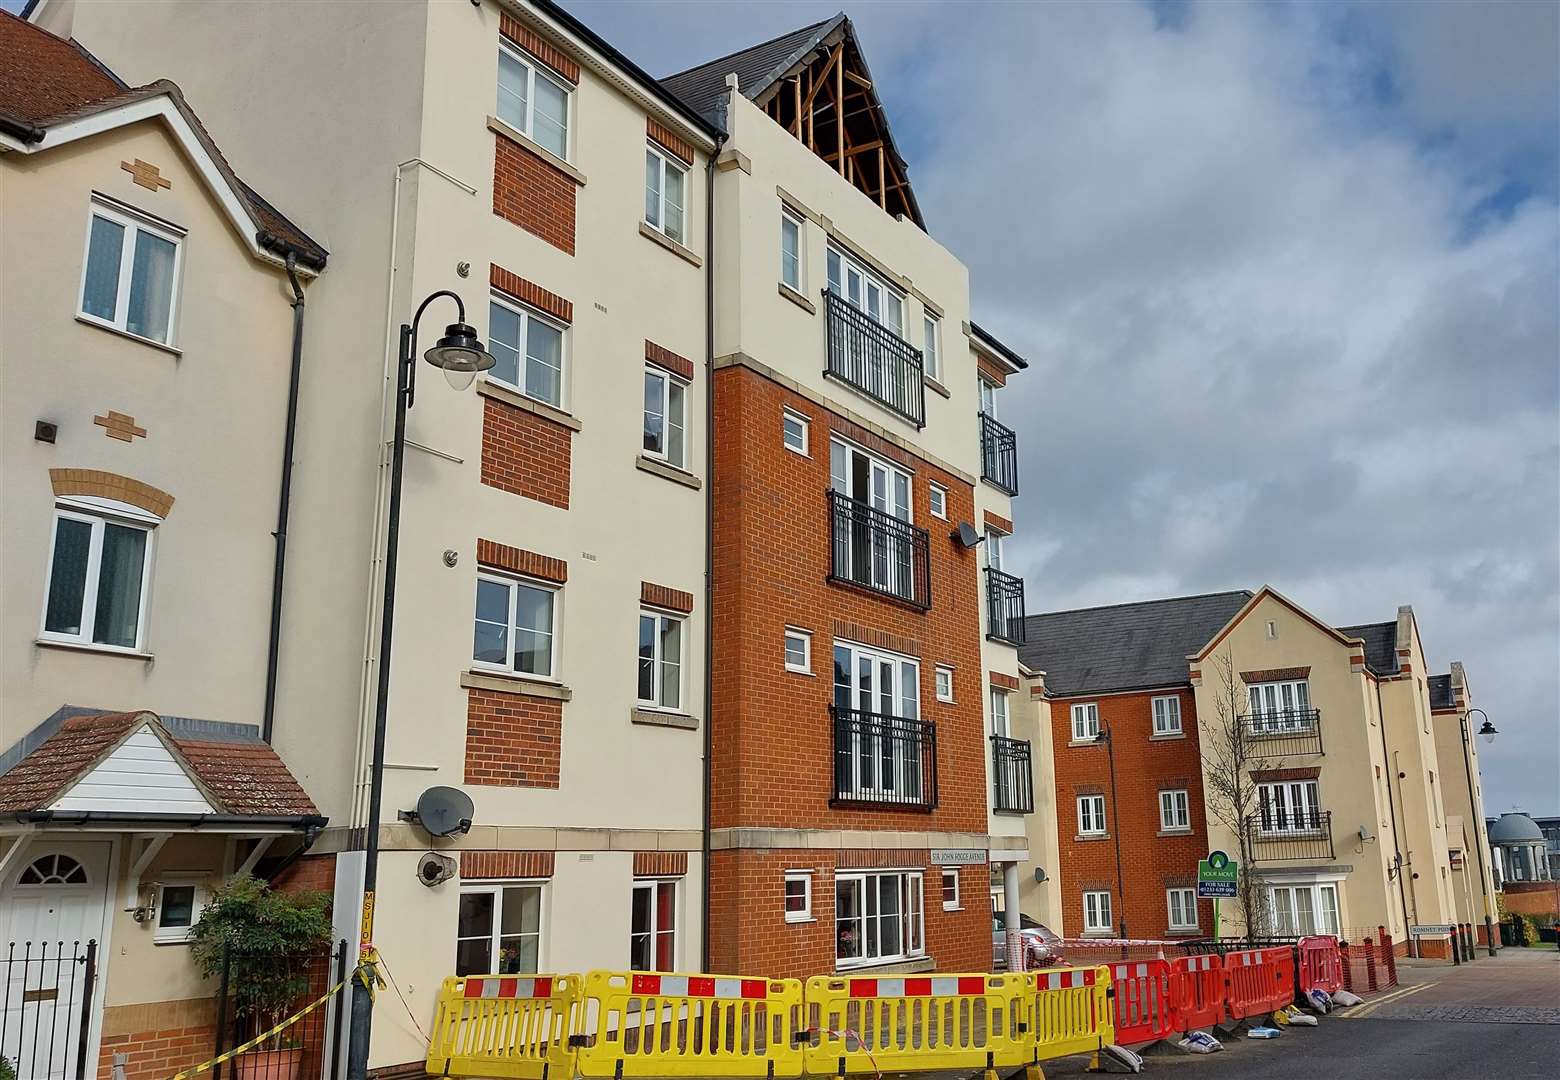 The flats in Sir John Fogge Avenue in Repton Park were damaged by Storm Eunice